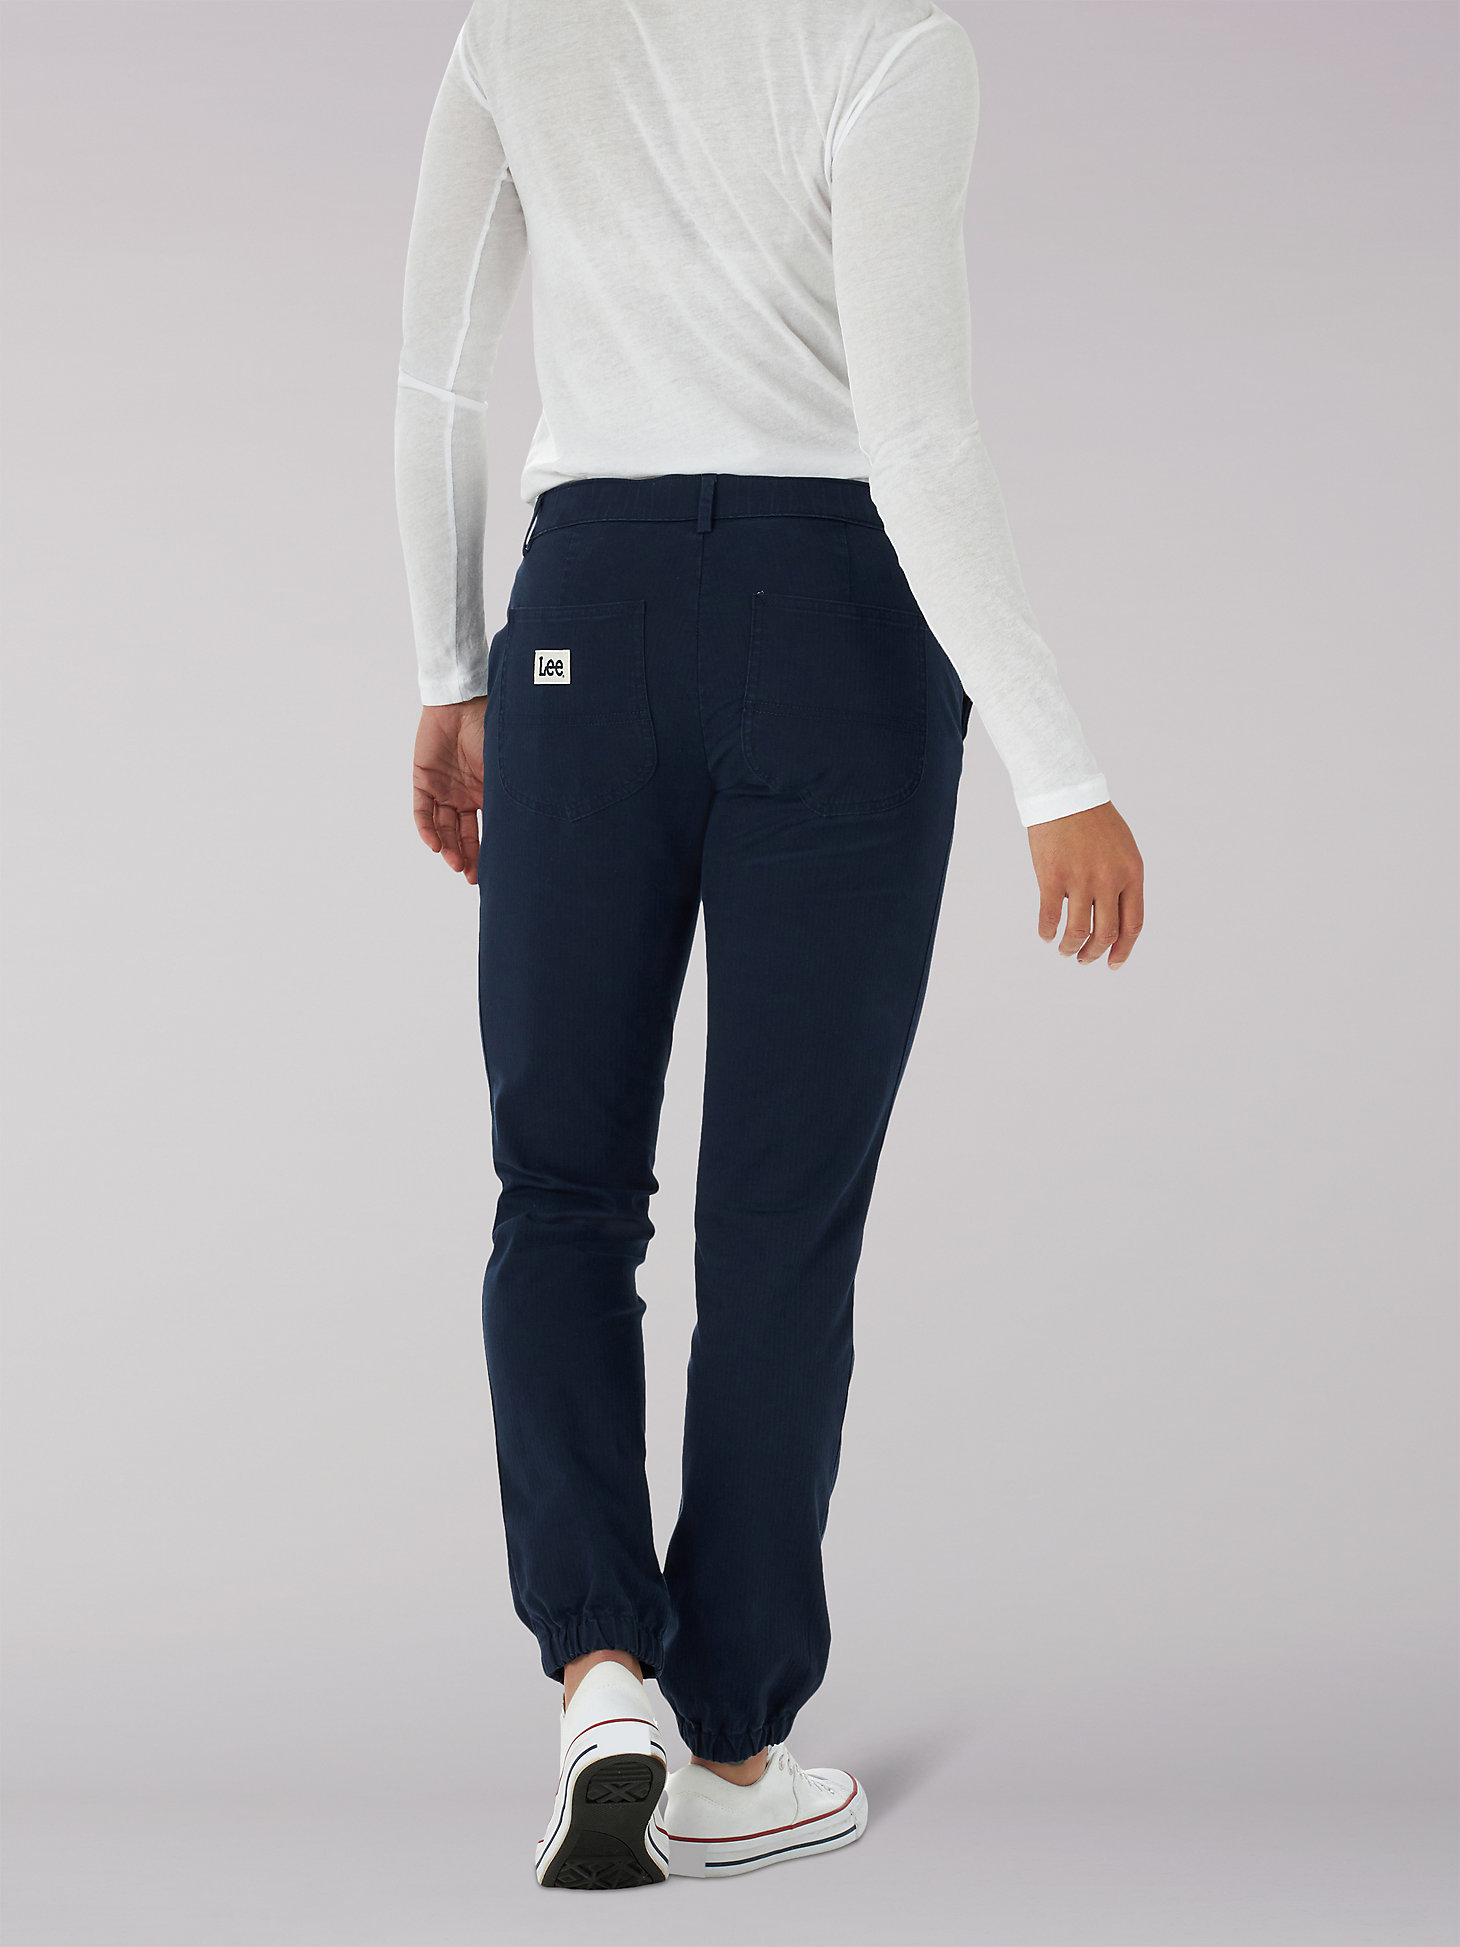 Women's Ultra Lux Comfort Pull-On Jogger Pant in Emperor Navy alternative view 1